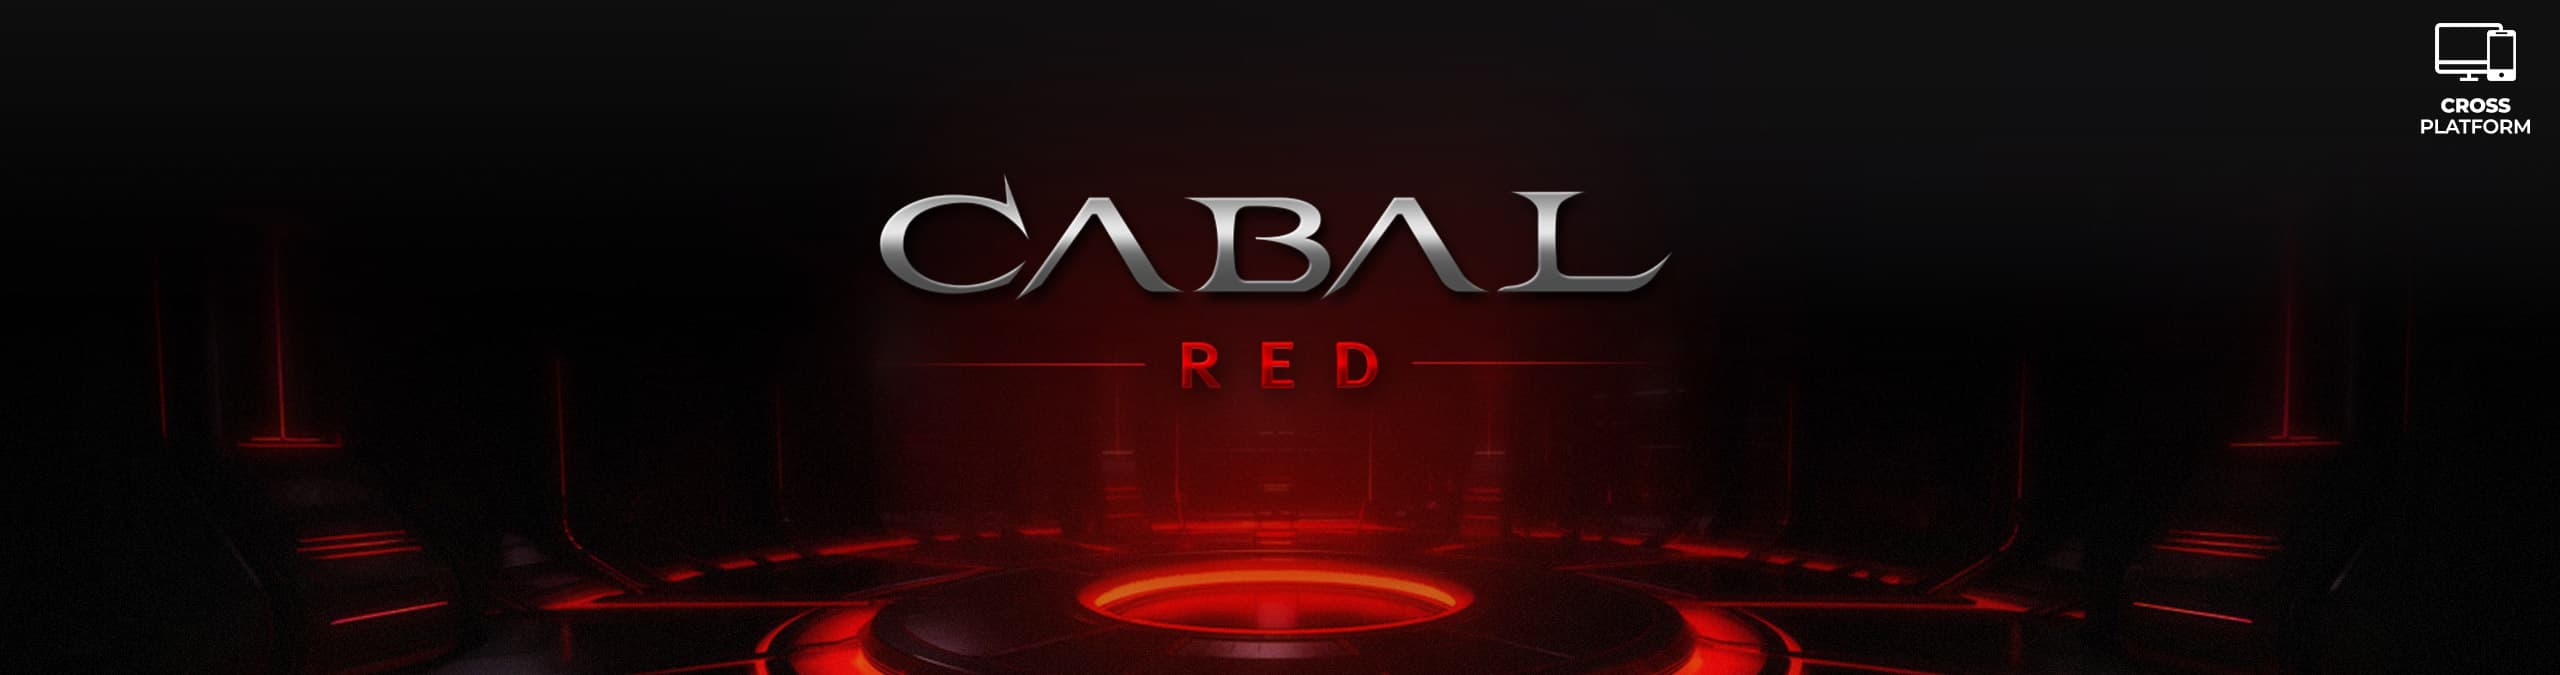 genplay Cabal red